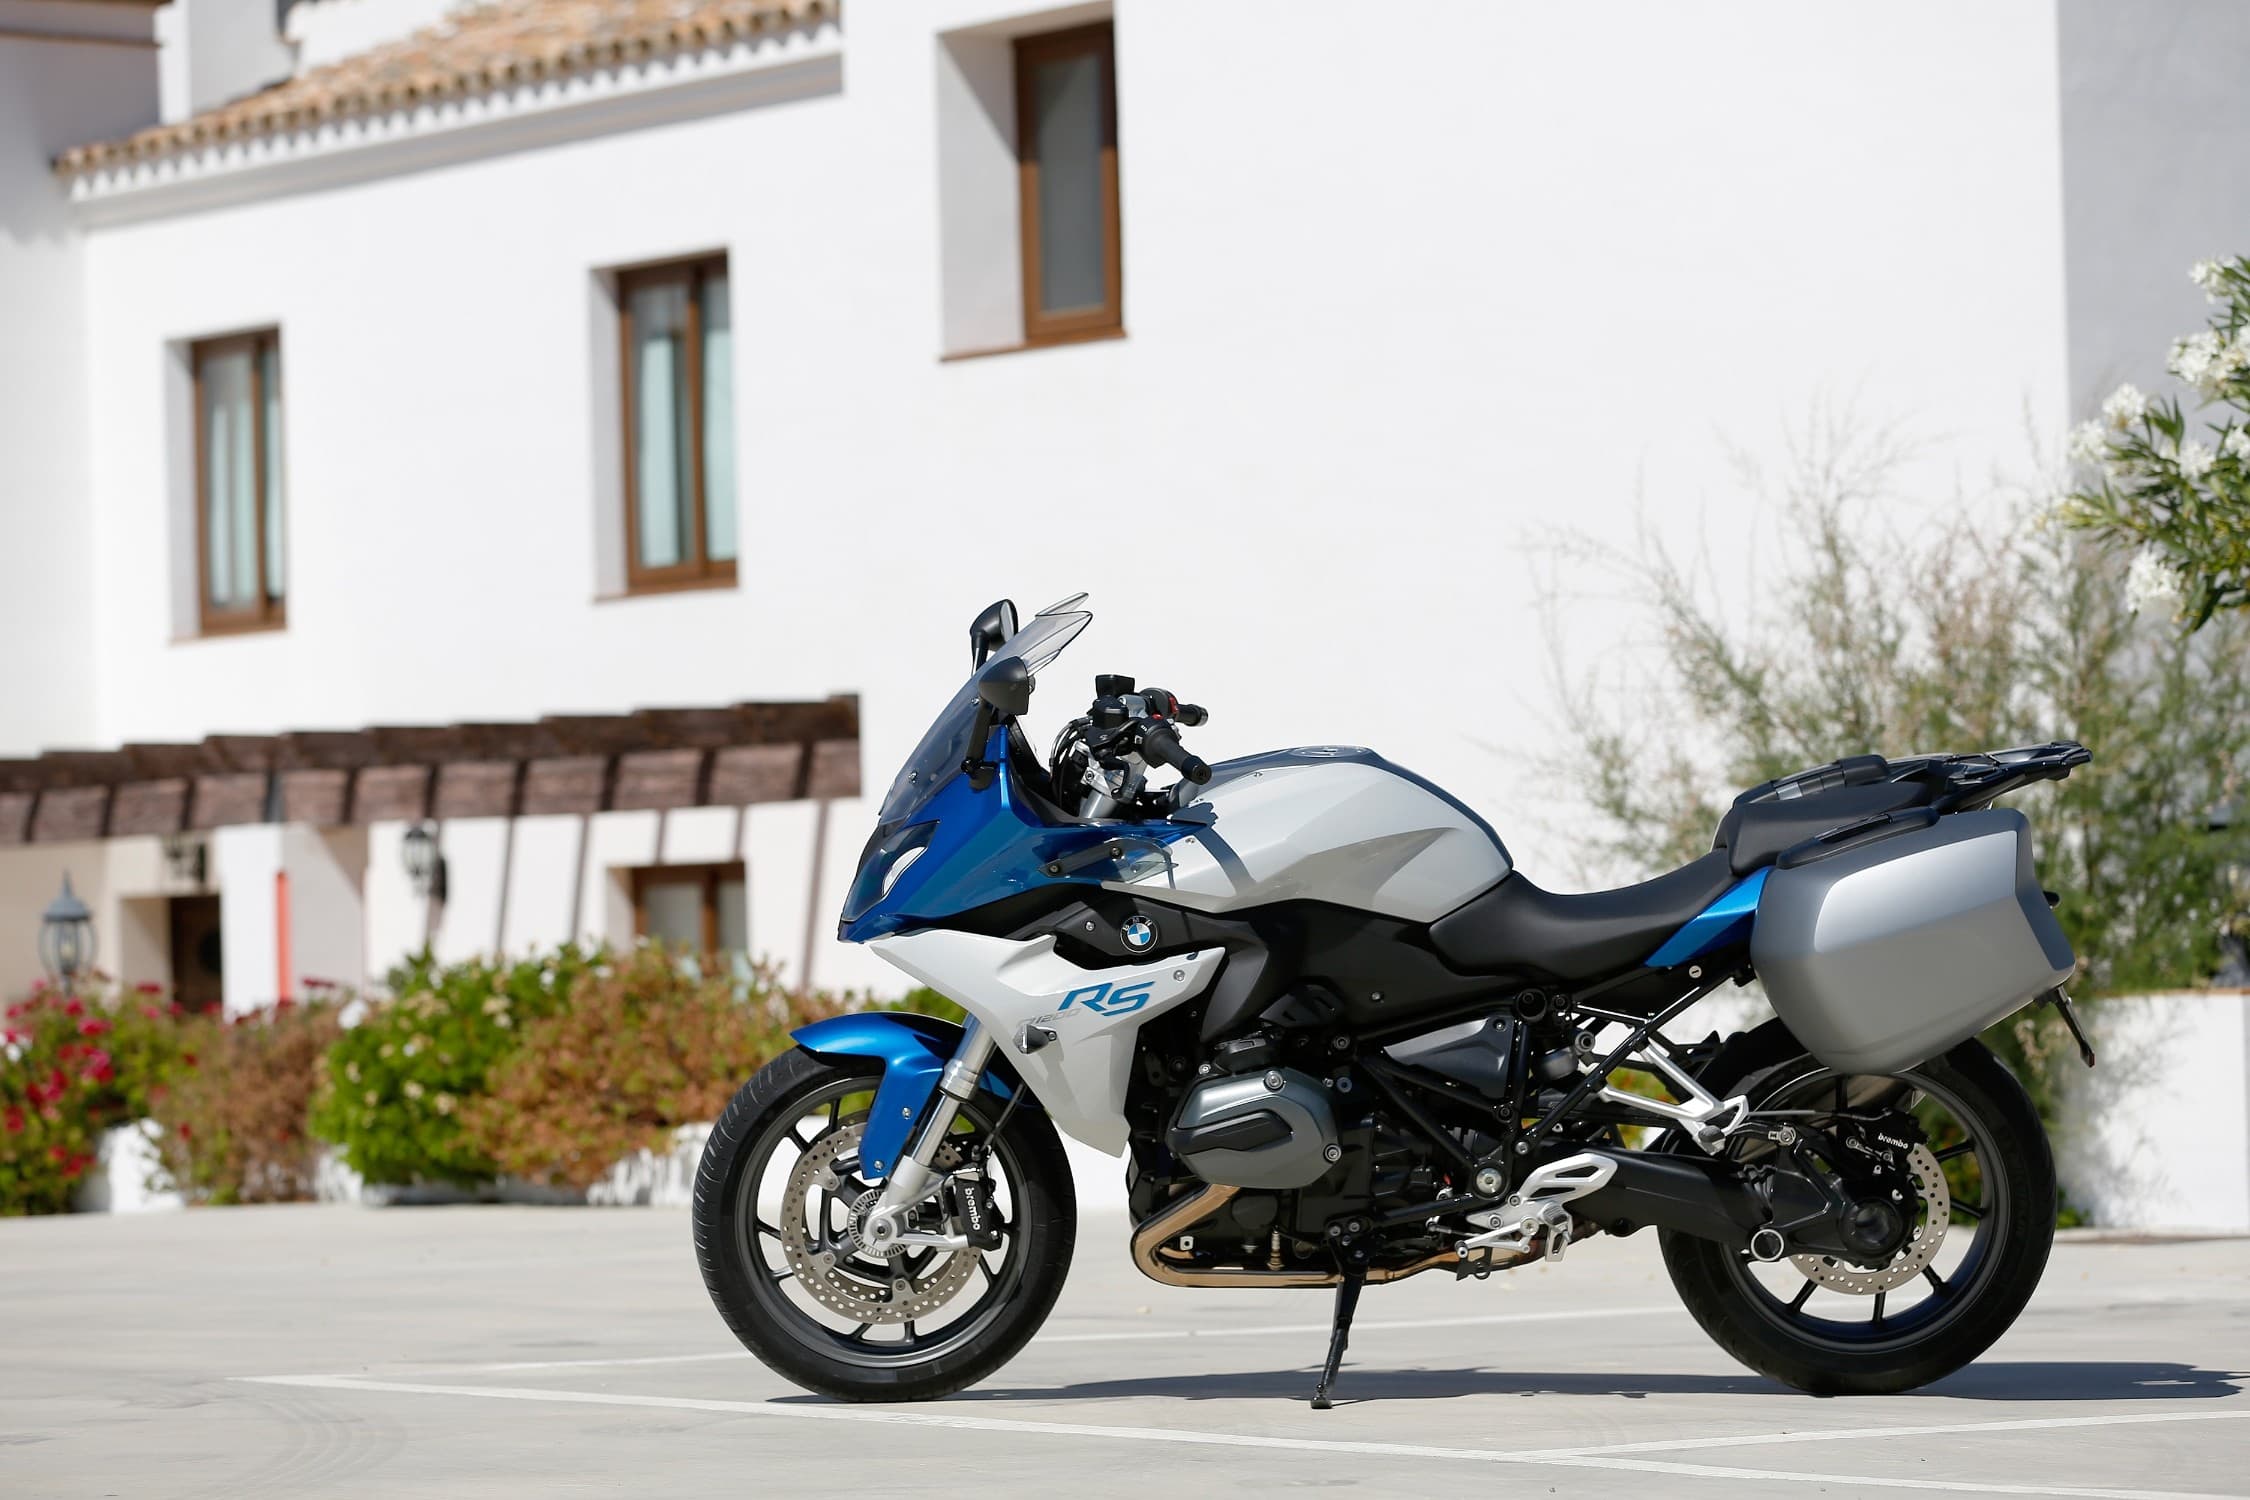 BMW R 1200 RS outdoors on kickstand by white building